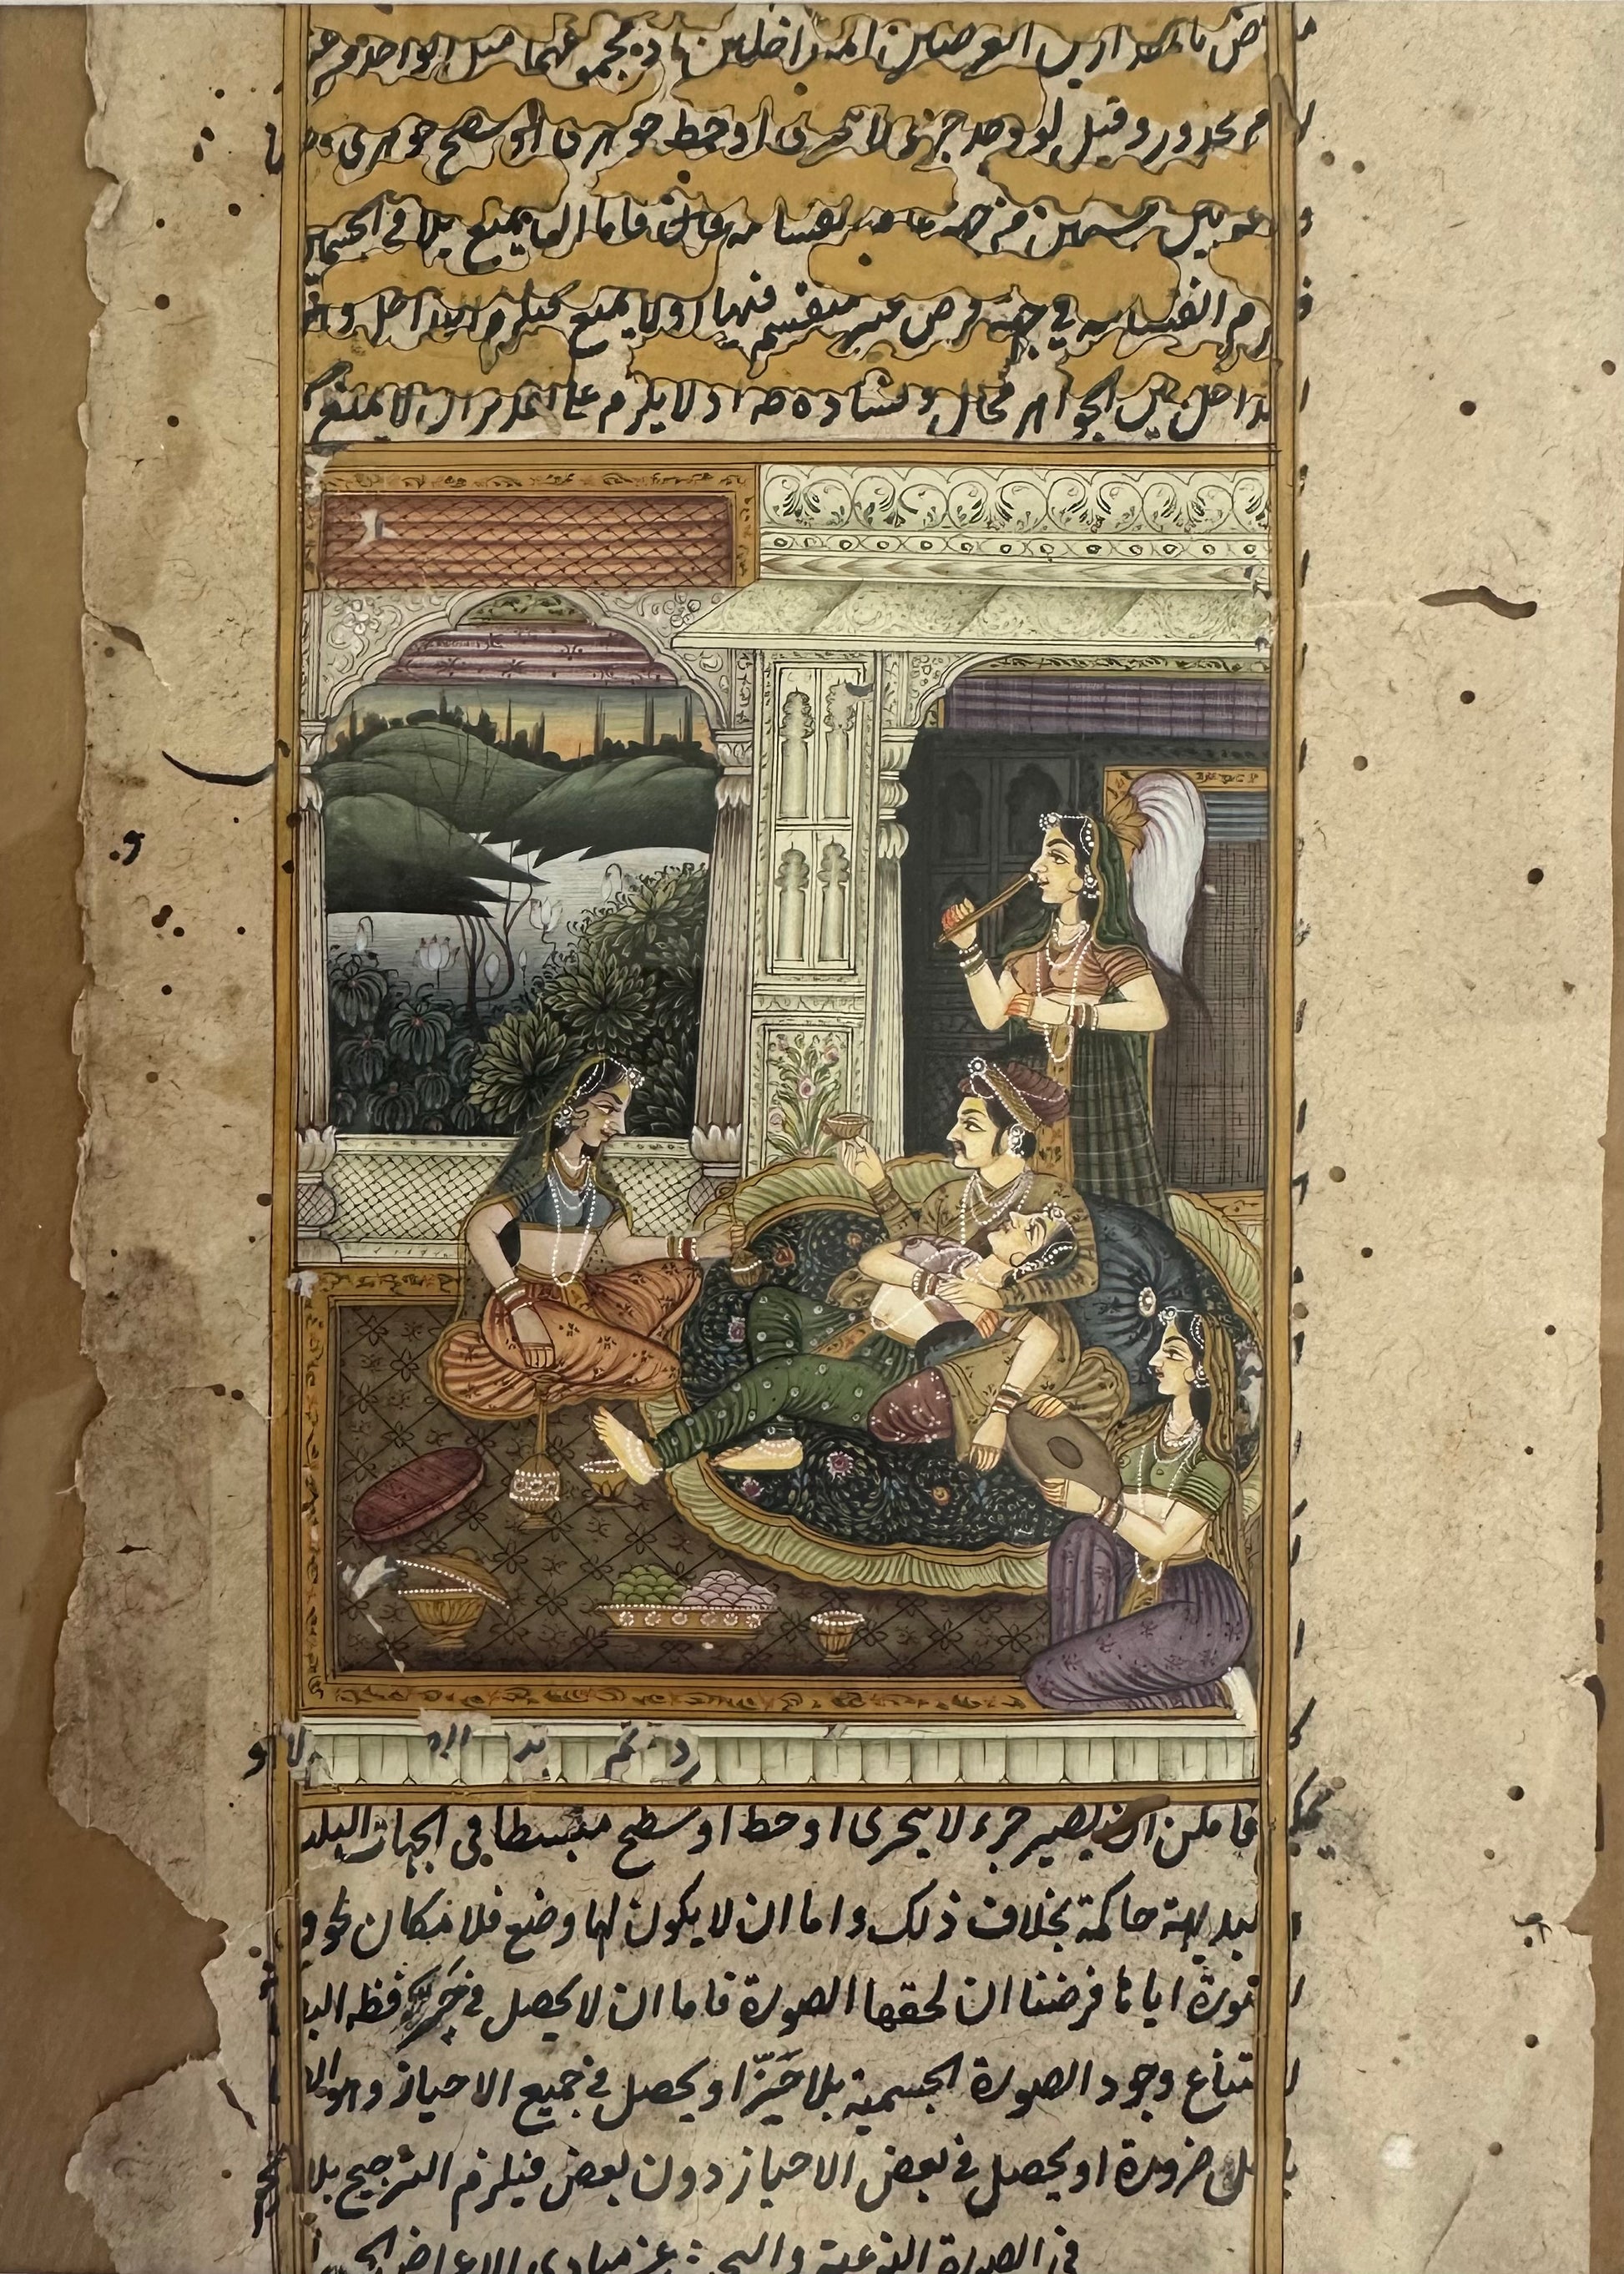 Indian Miniature Painting of Lovers with Attendants - DharBazaar